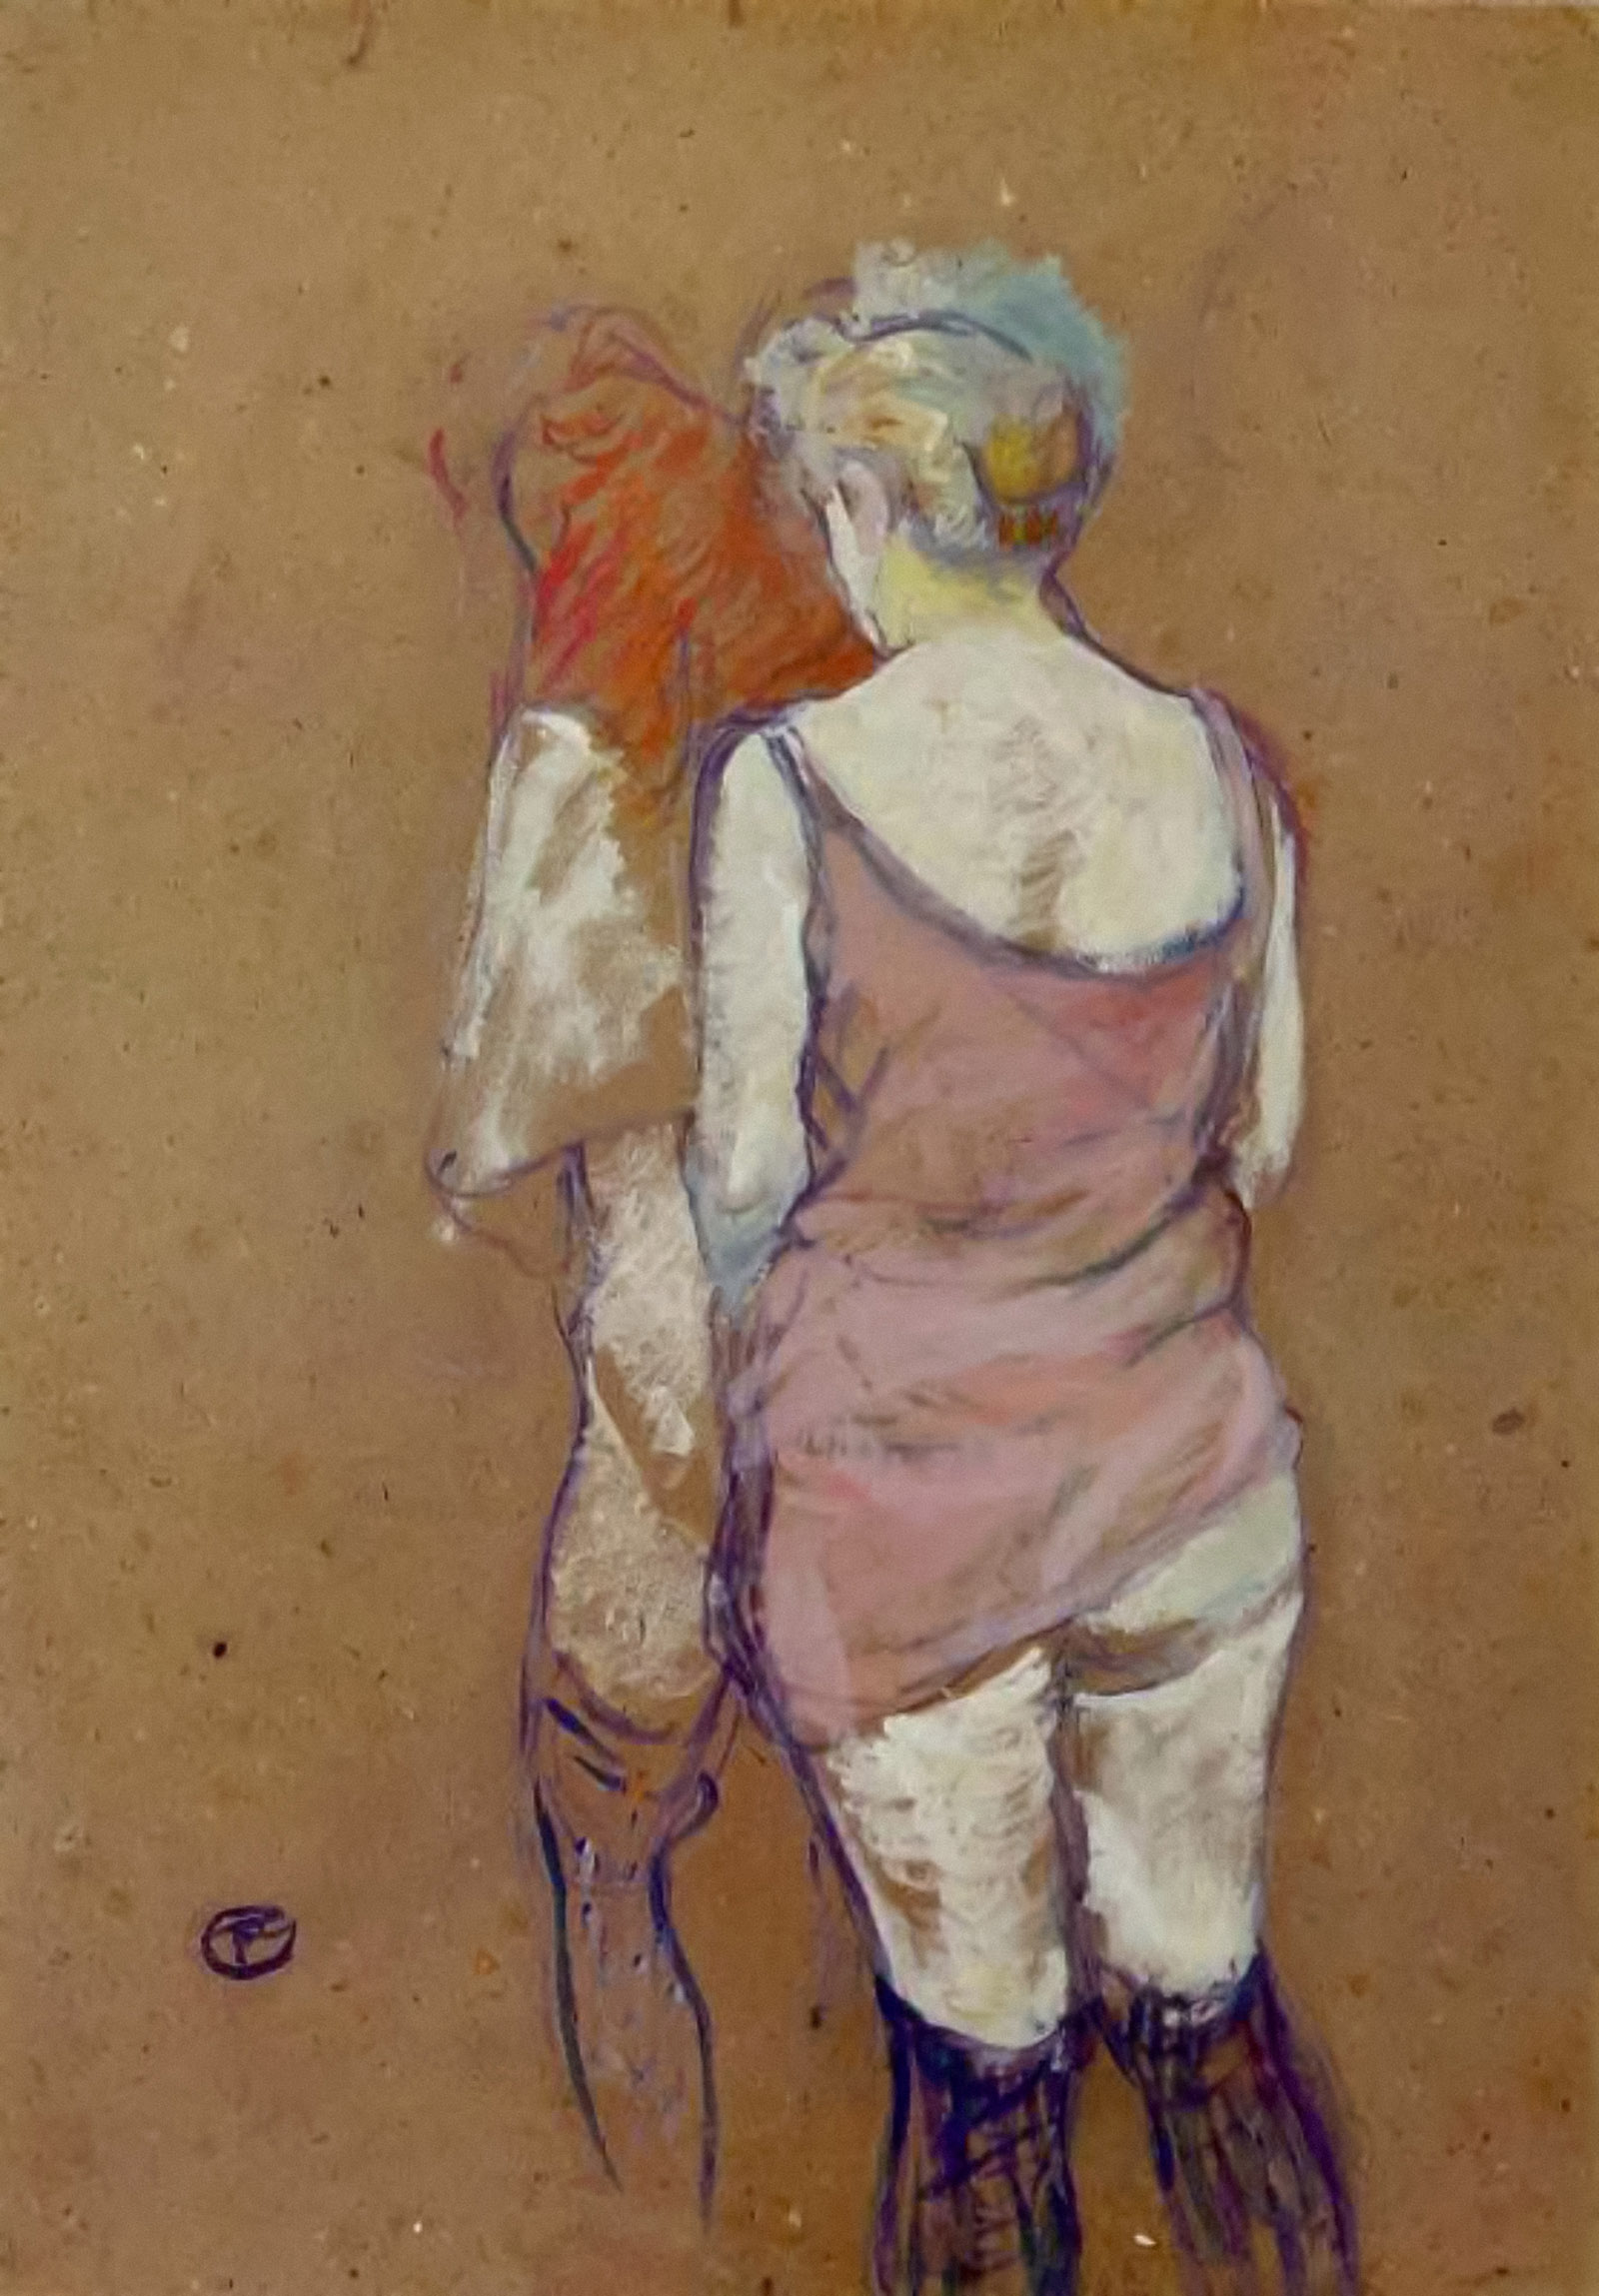 Two Half-Naked Women Seen from Behind in the Rue des Moulins Brothel; painting by Henri de Toulouse-Lautrec